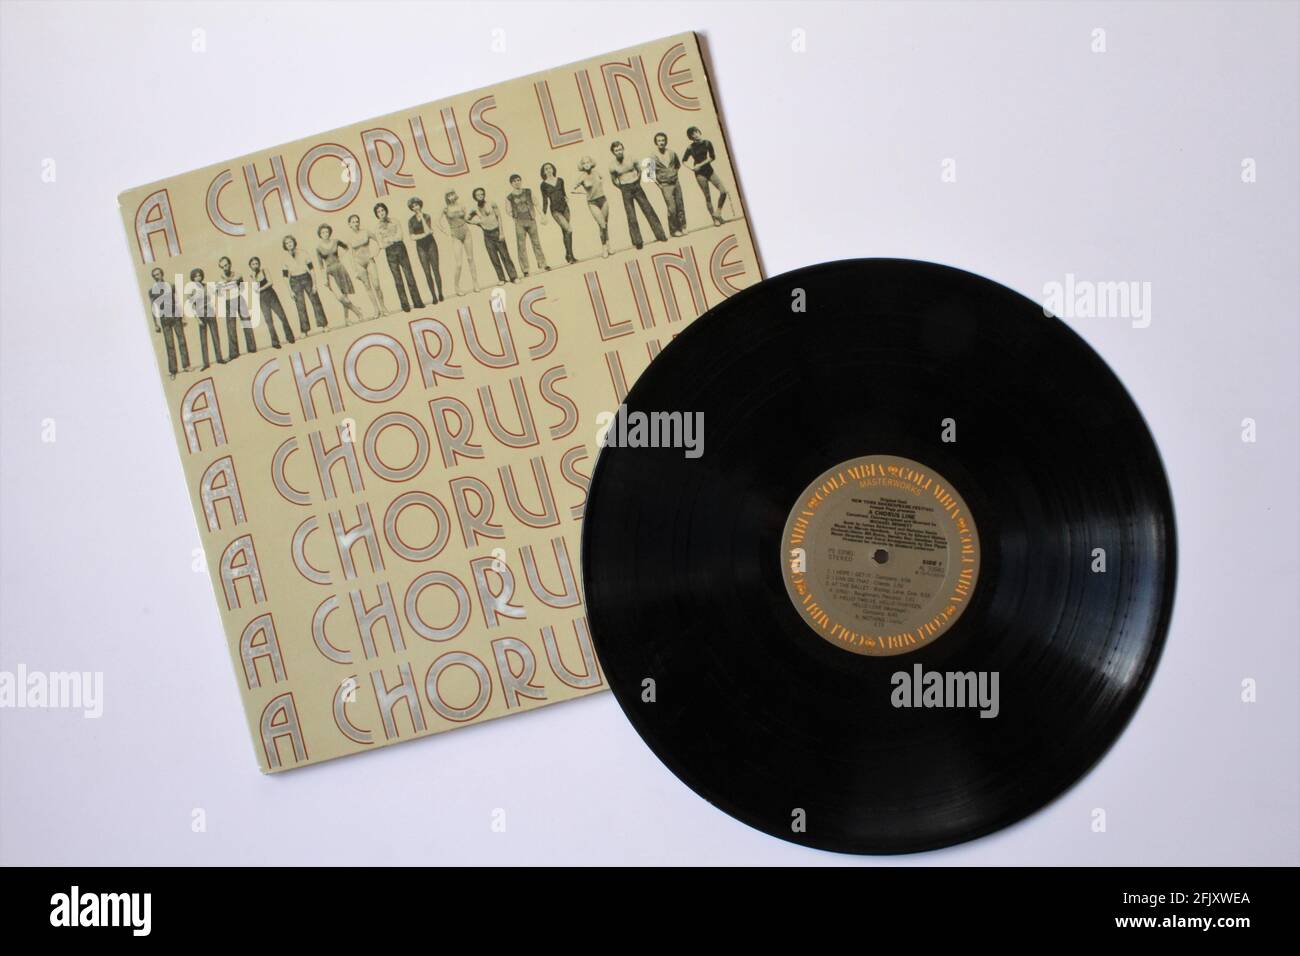 Broadway Musical for the 1985 film adaptation of A Chorus Line music album on vinyl record LP disc. Stock Photo